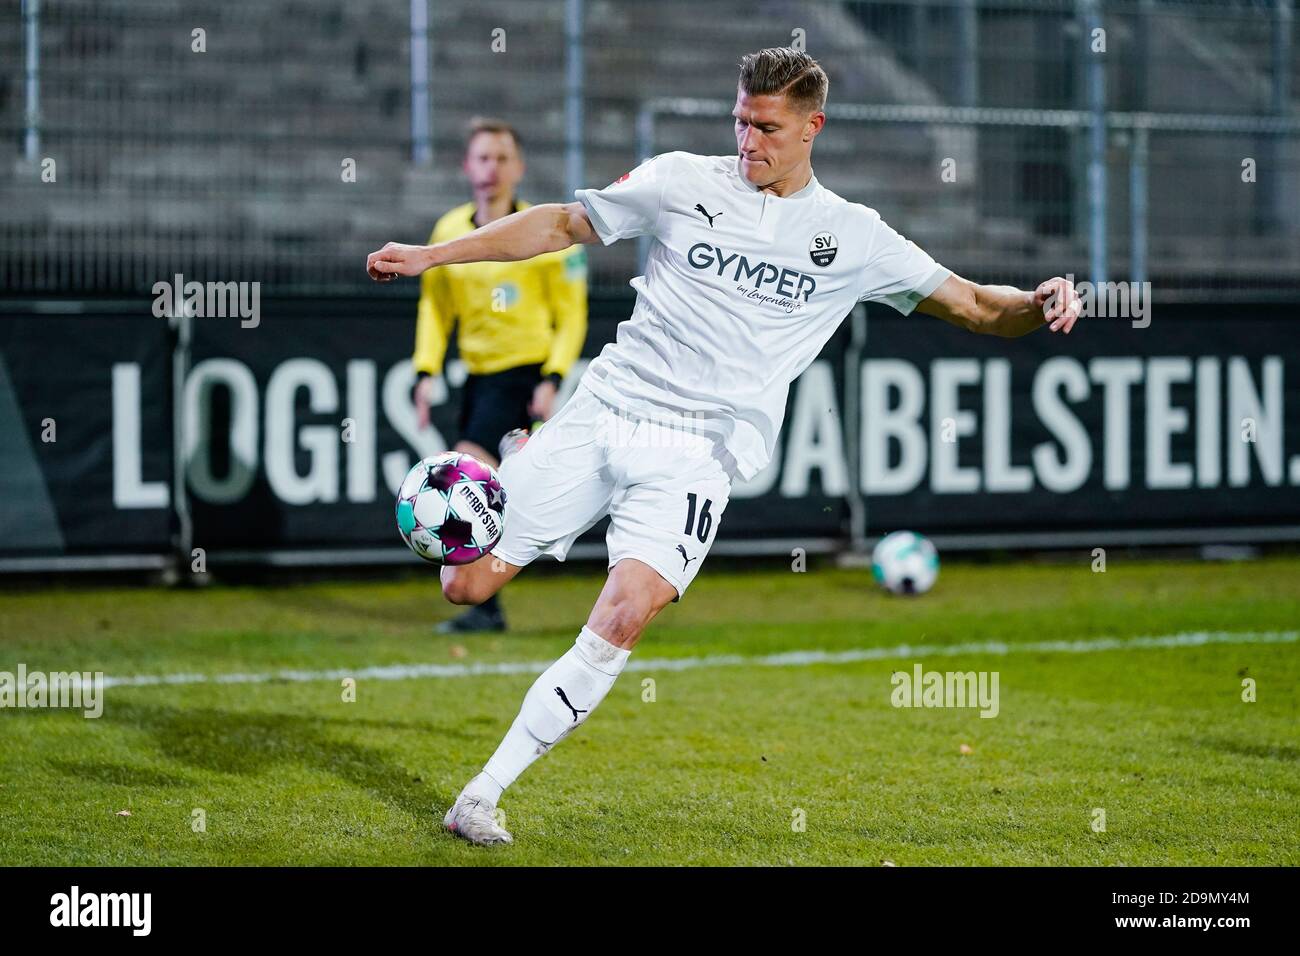 Sandhausen, Germany. 06th Nov, 2020. Football: 2nd Bundesliga, SV Sandhausen - Eintracht Braunschweig, 7th matchday, Hardtwaldstadion. Sandhausens Kevin Behrens plays the ball. Credit: Uwe Anspach/dpa - IMPORTANT NOTE: In accordance with the regulations of the DFL Deutsche Fußball Liga and the DFB Deutscher Fußball-Bund, it is prohibited to exploit or have exploited in the stadium and/or from the game taken photographs in the form of sequence images and/or video-like photo series./dpa/Alamy Live News Stock Photo